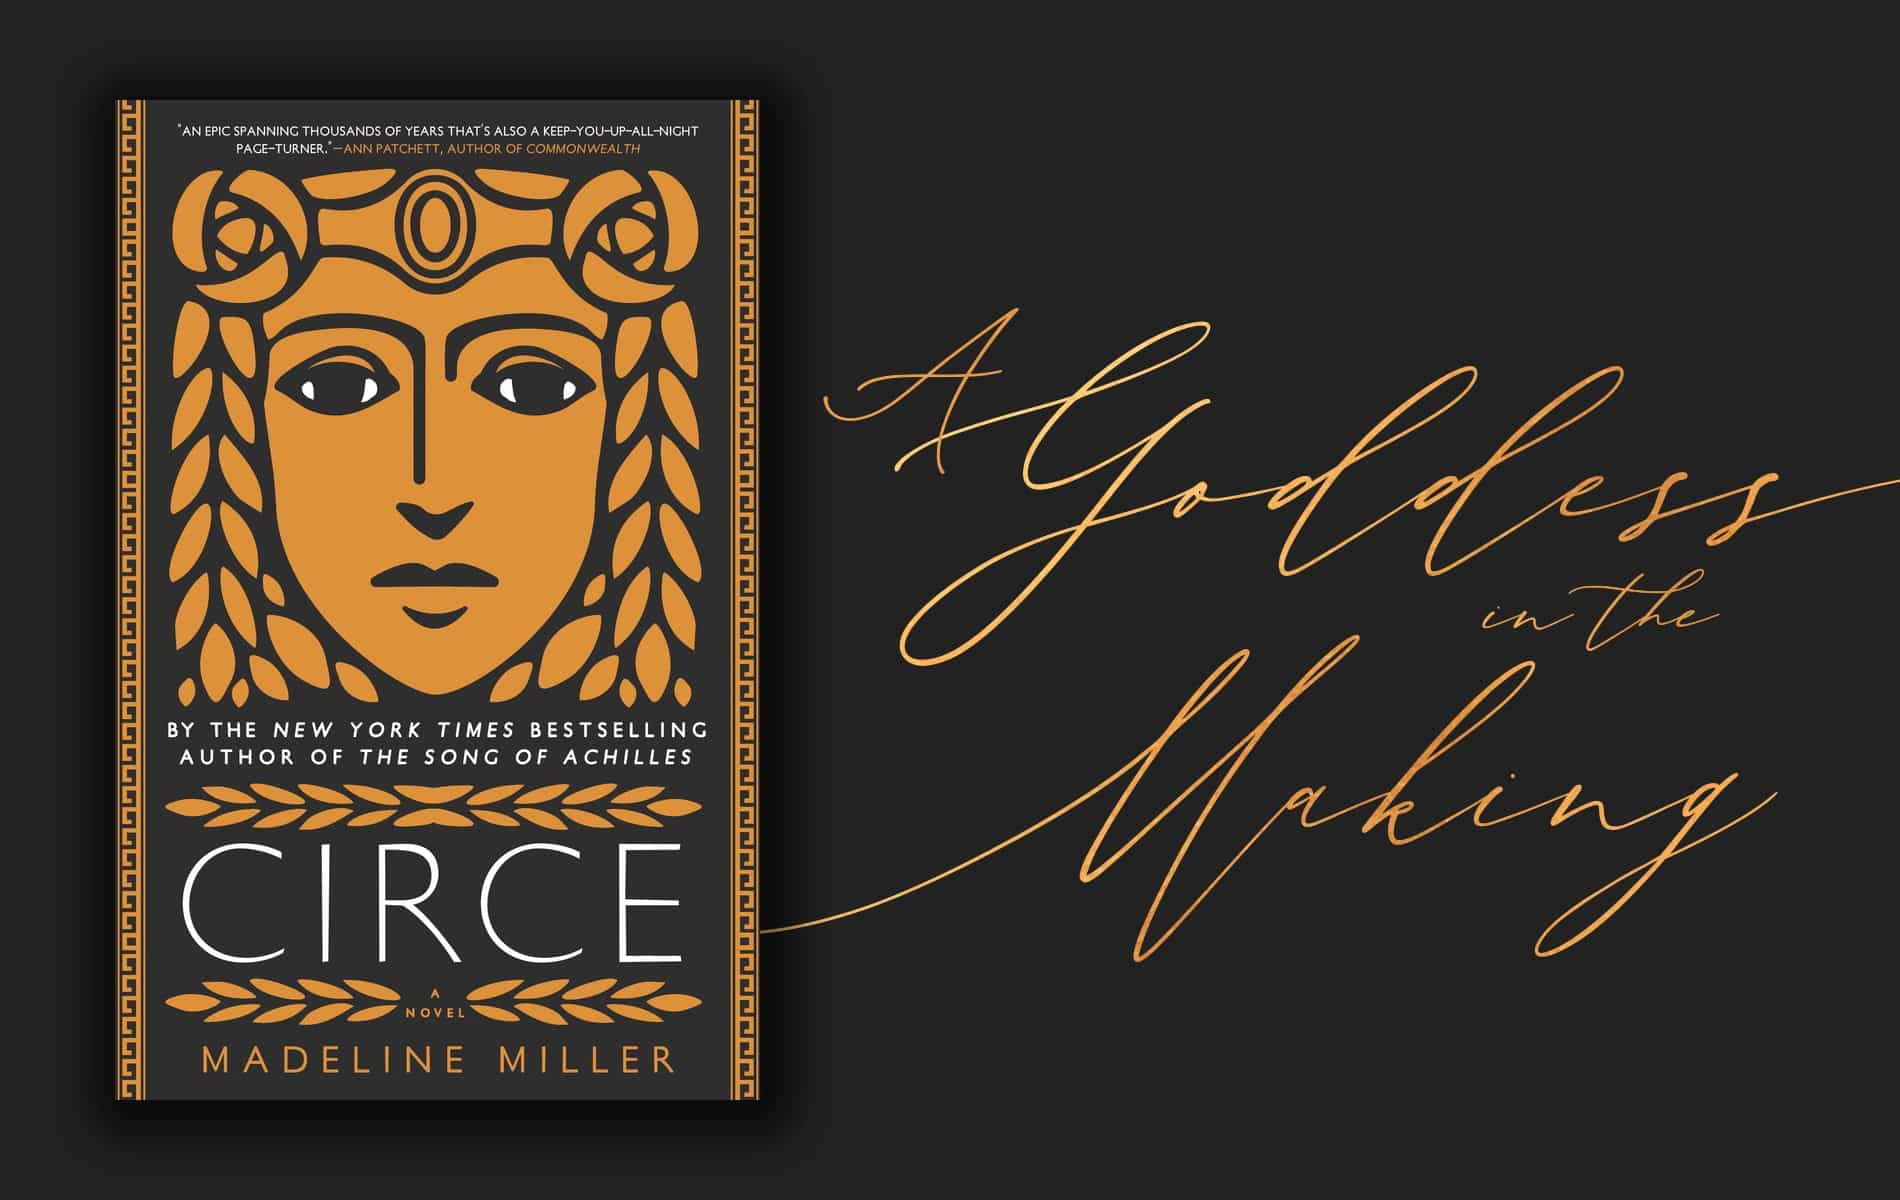 Circe A Novel by Madeline Miller, The Readers Corner VIE Book Club